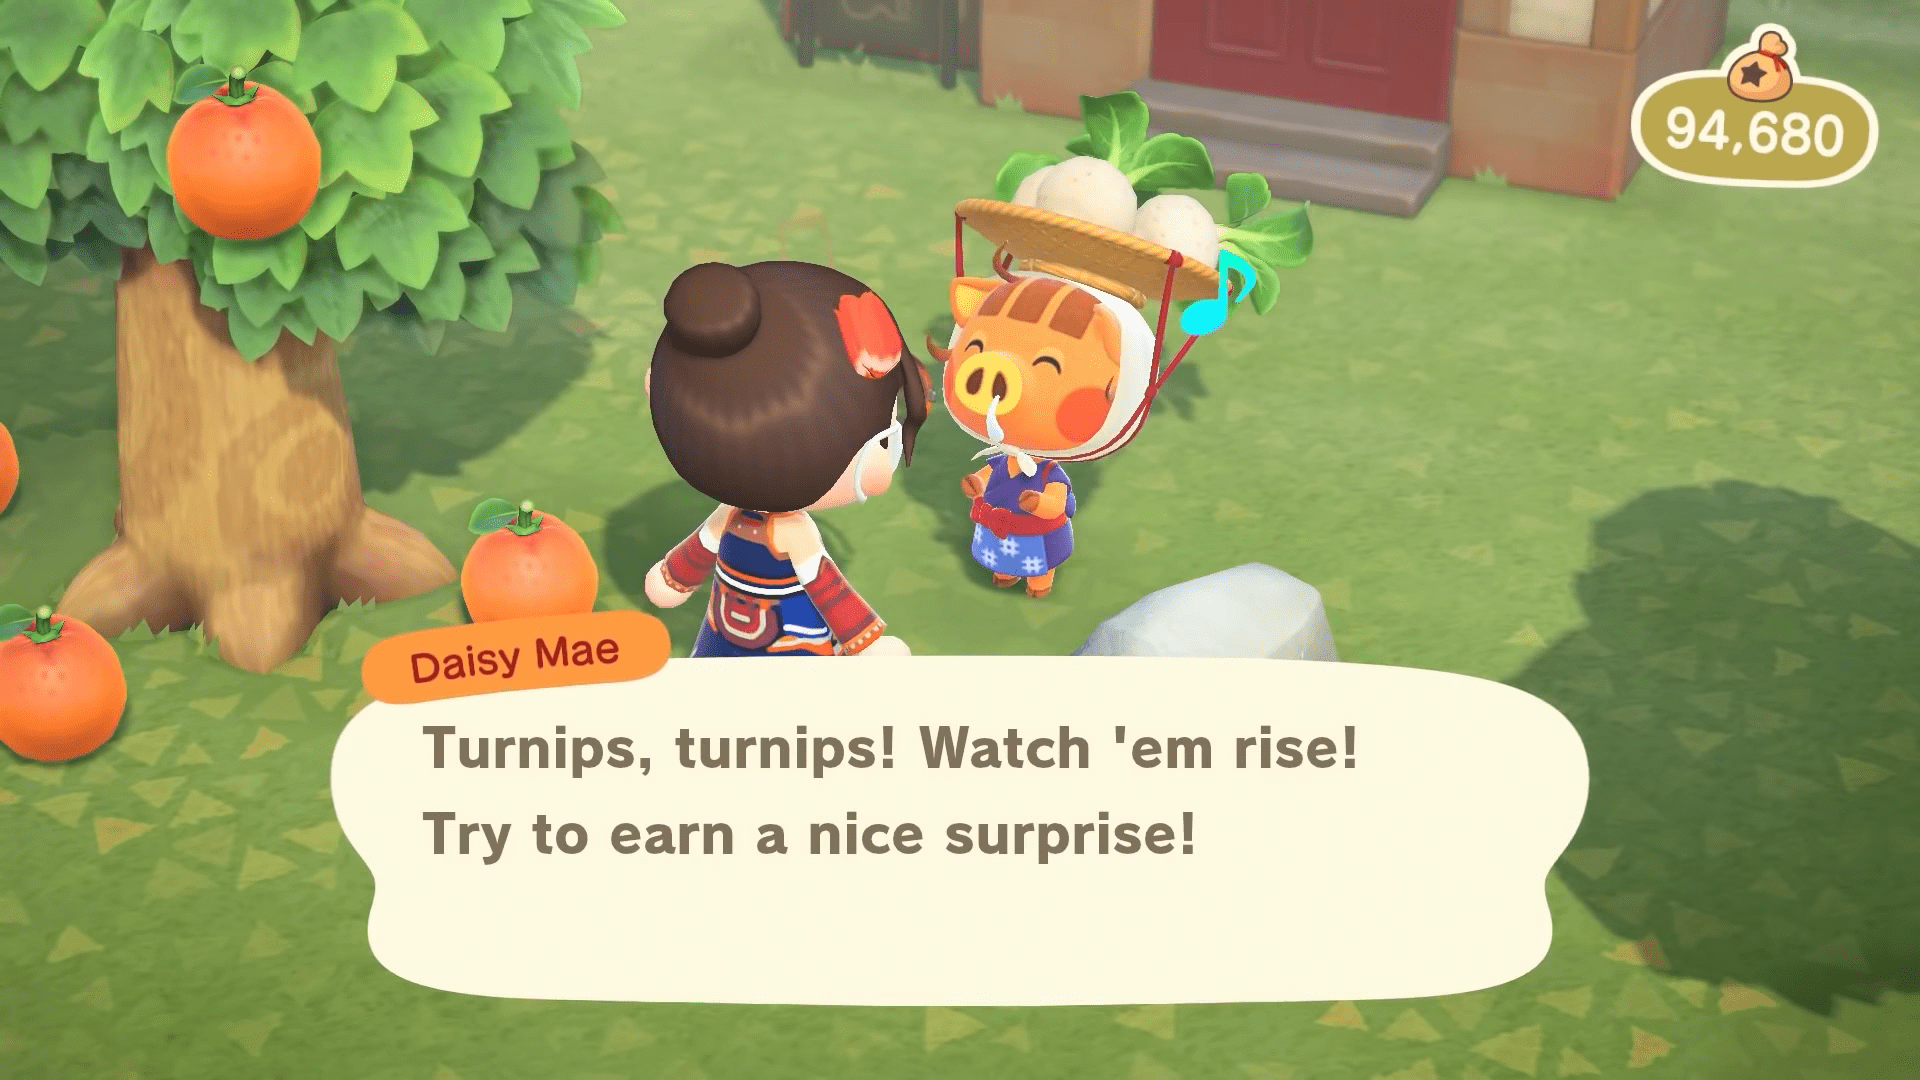 Animal Crossing New Horizons Online Resources Help Players Make Millions Of Bells In the Stalk Market